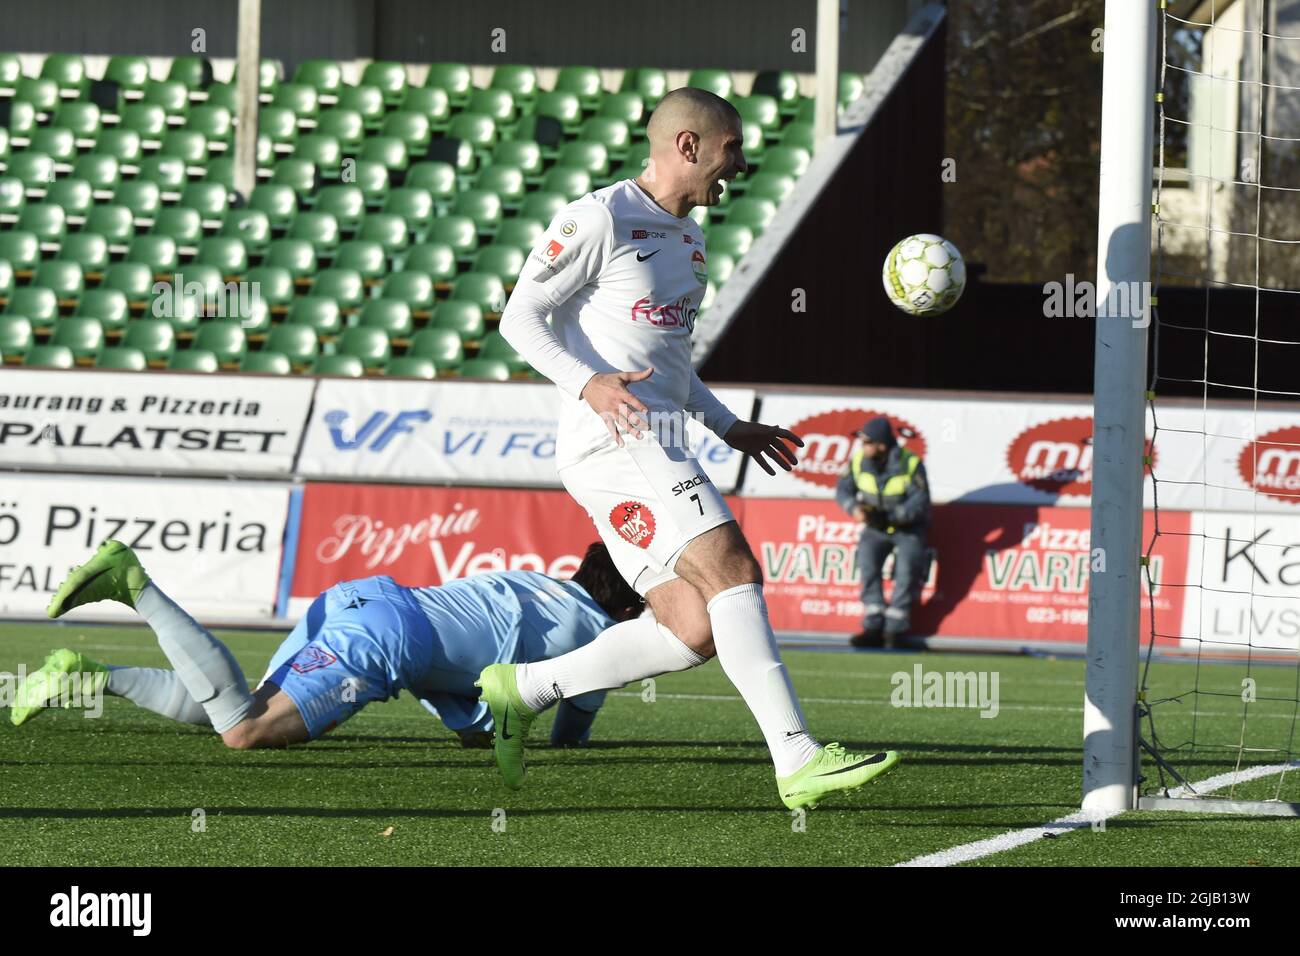 FILE 2017-10-28 Dalkurd player Rawez Lawan scores the opening goal past Gais goalkeeper Damir Mehic during their Superettan (Swedish second soccer leauge) soccer match at Domnarvsvallen in Borlange on Oct. 28, 2017. The 1-0 win means Dalkurd will play in Allsvenskan, the Swedish first division soccer league 2018. Photo: Ulf Palm / TT / code 9110  Stock Photo